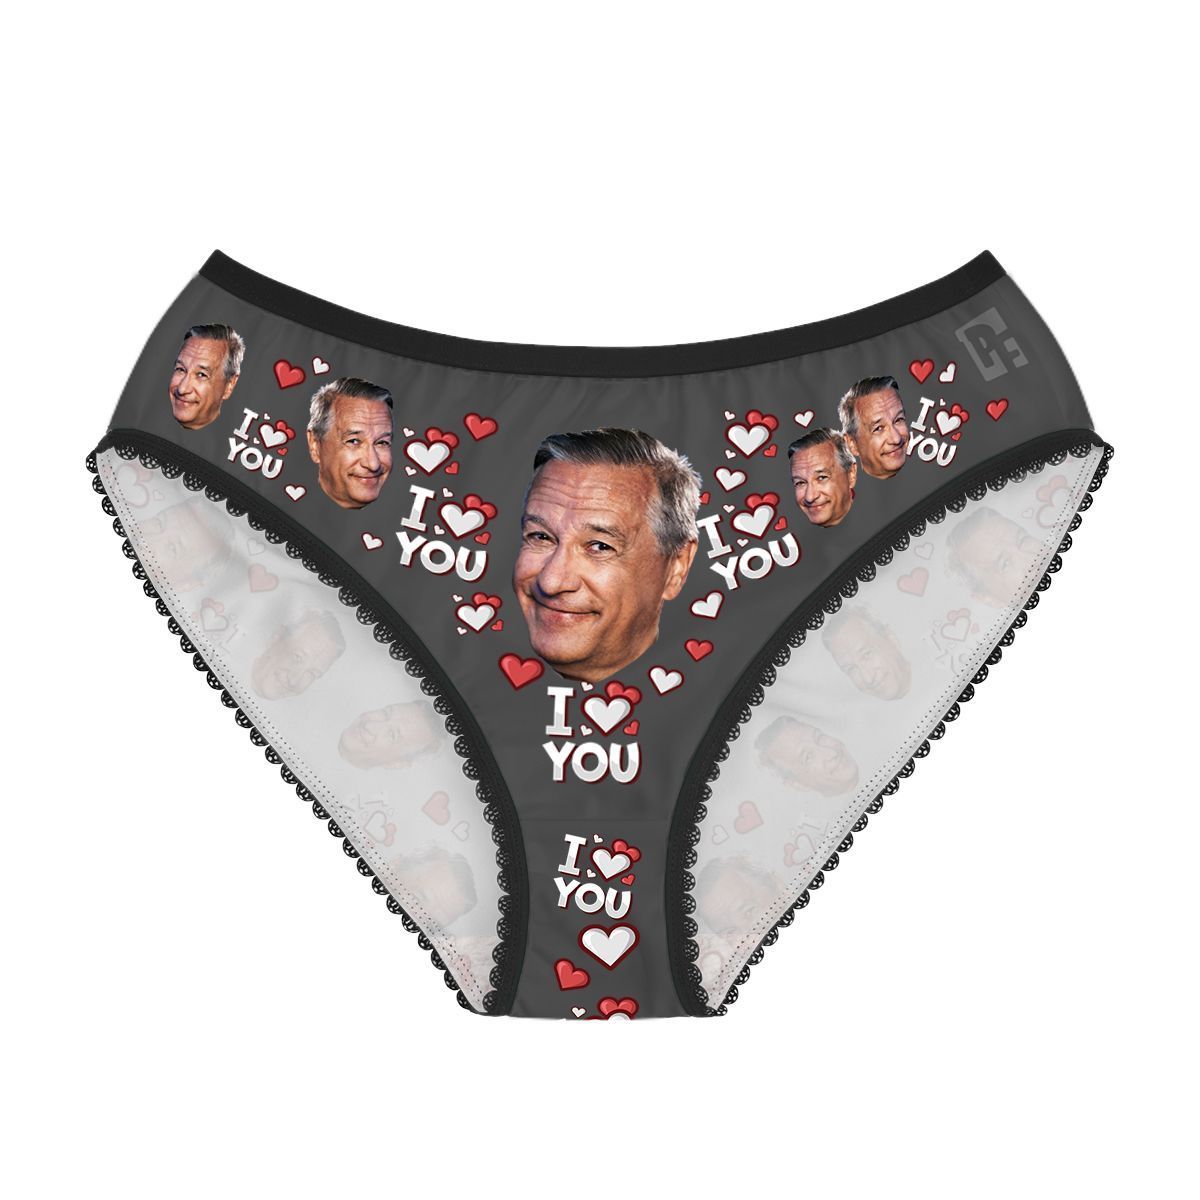 Dark I love you women's underwear briefs personalized with photo printed on them